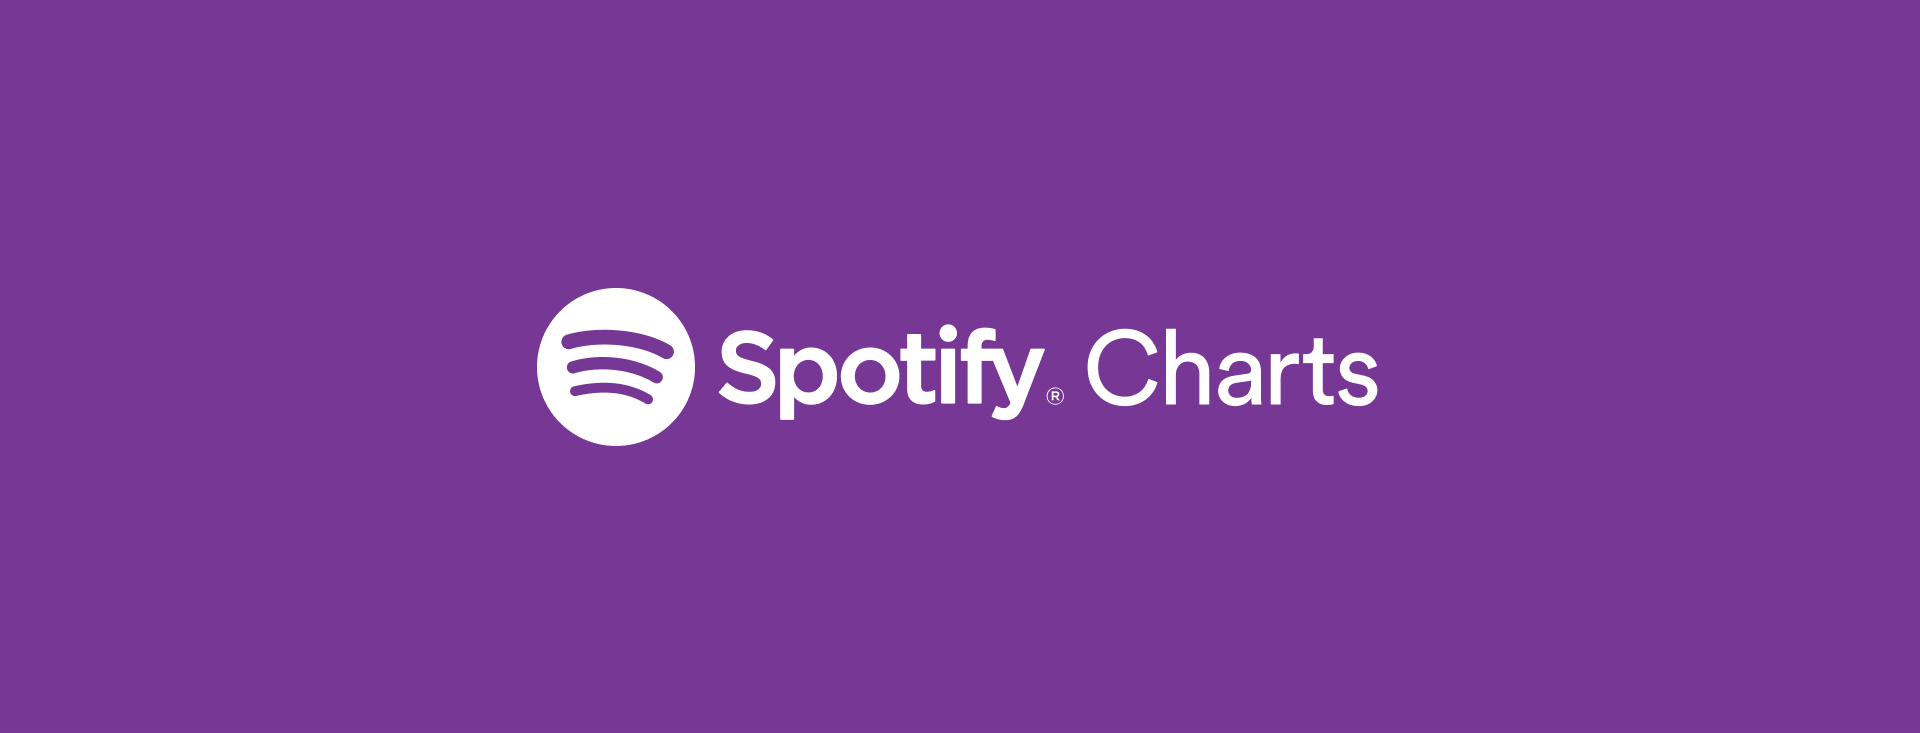 Spotify Weekly Music Charts announce the most streamed tracks and albums in the USA and globally each week